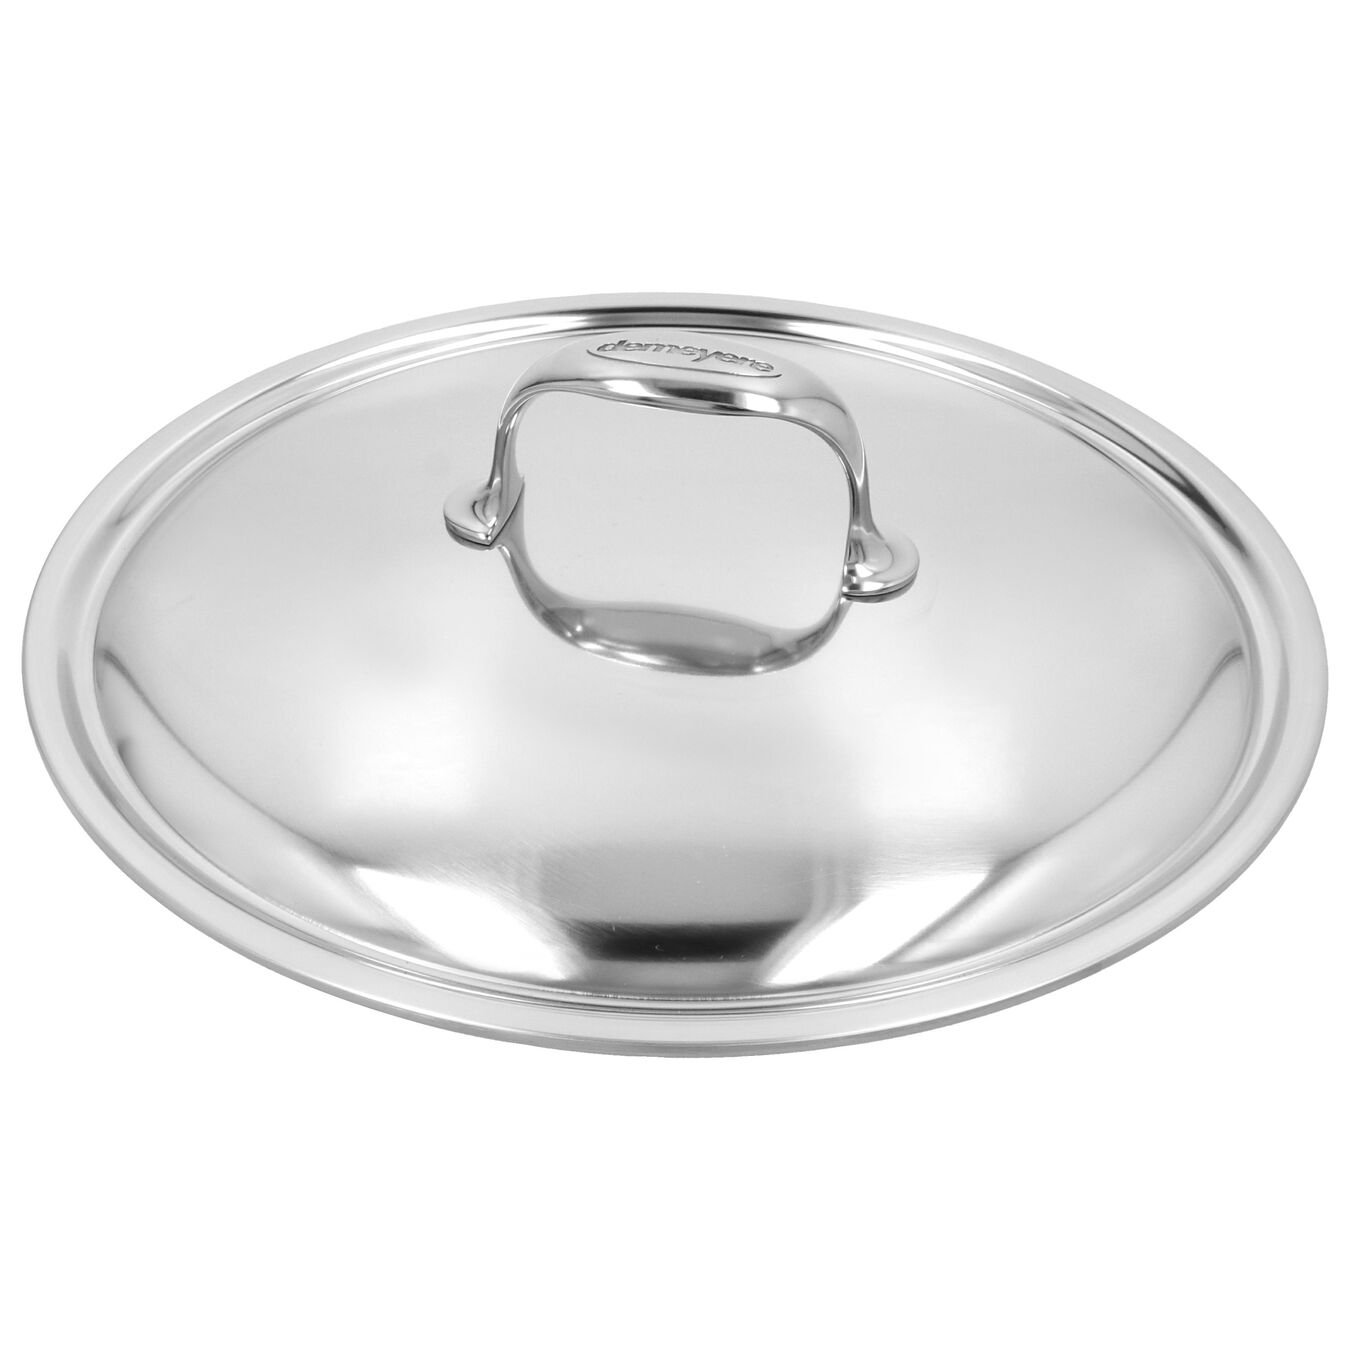 28 cm Serving pan with double walled lid,,large 5